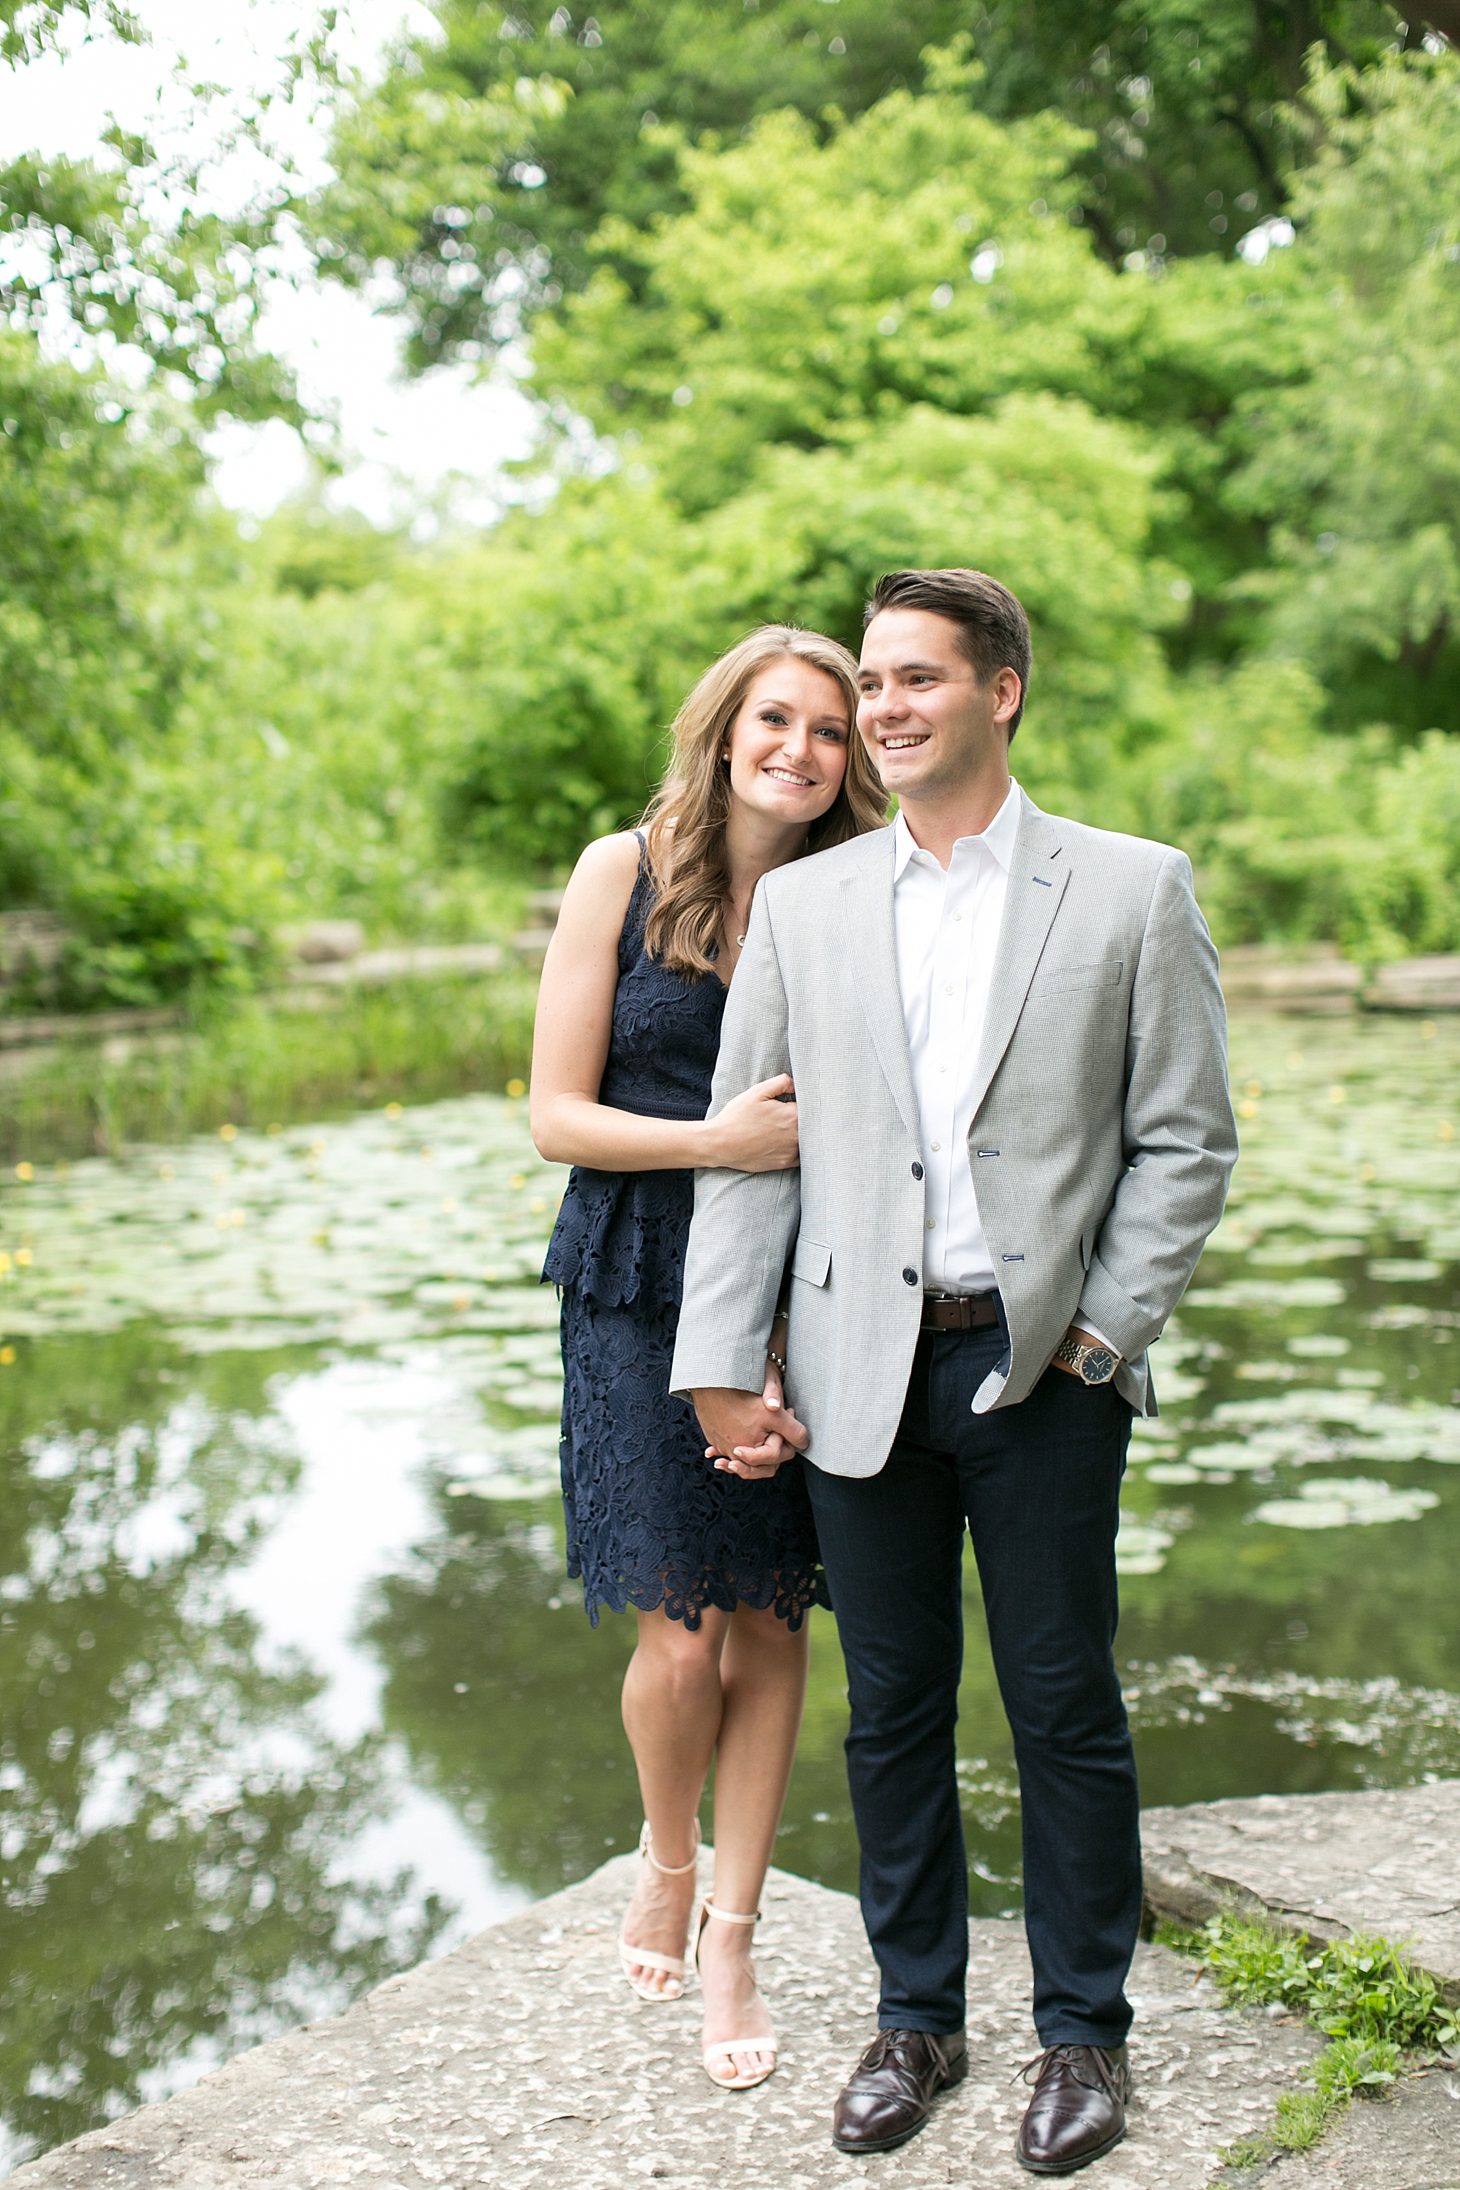 Lily Pool Engagement Photos Chicago_0013